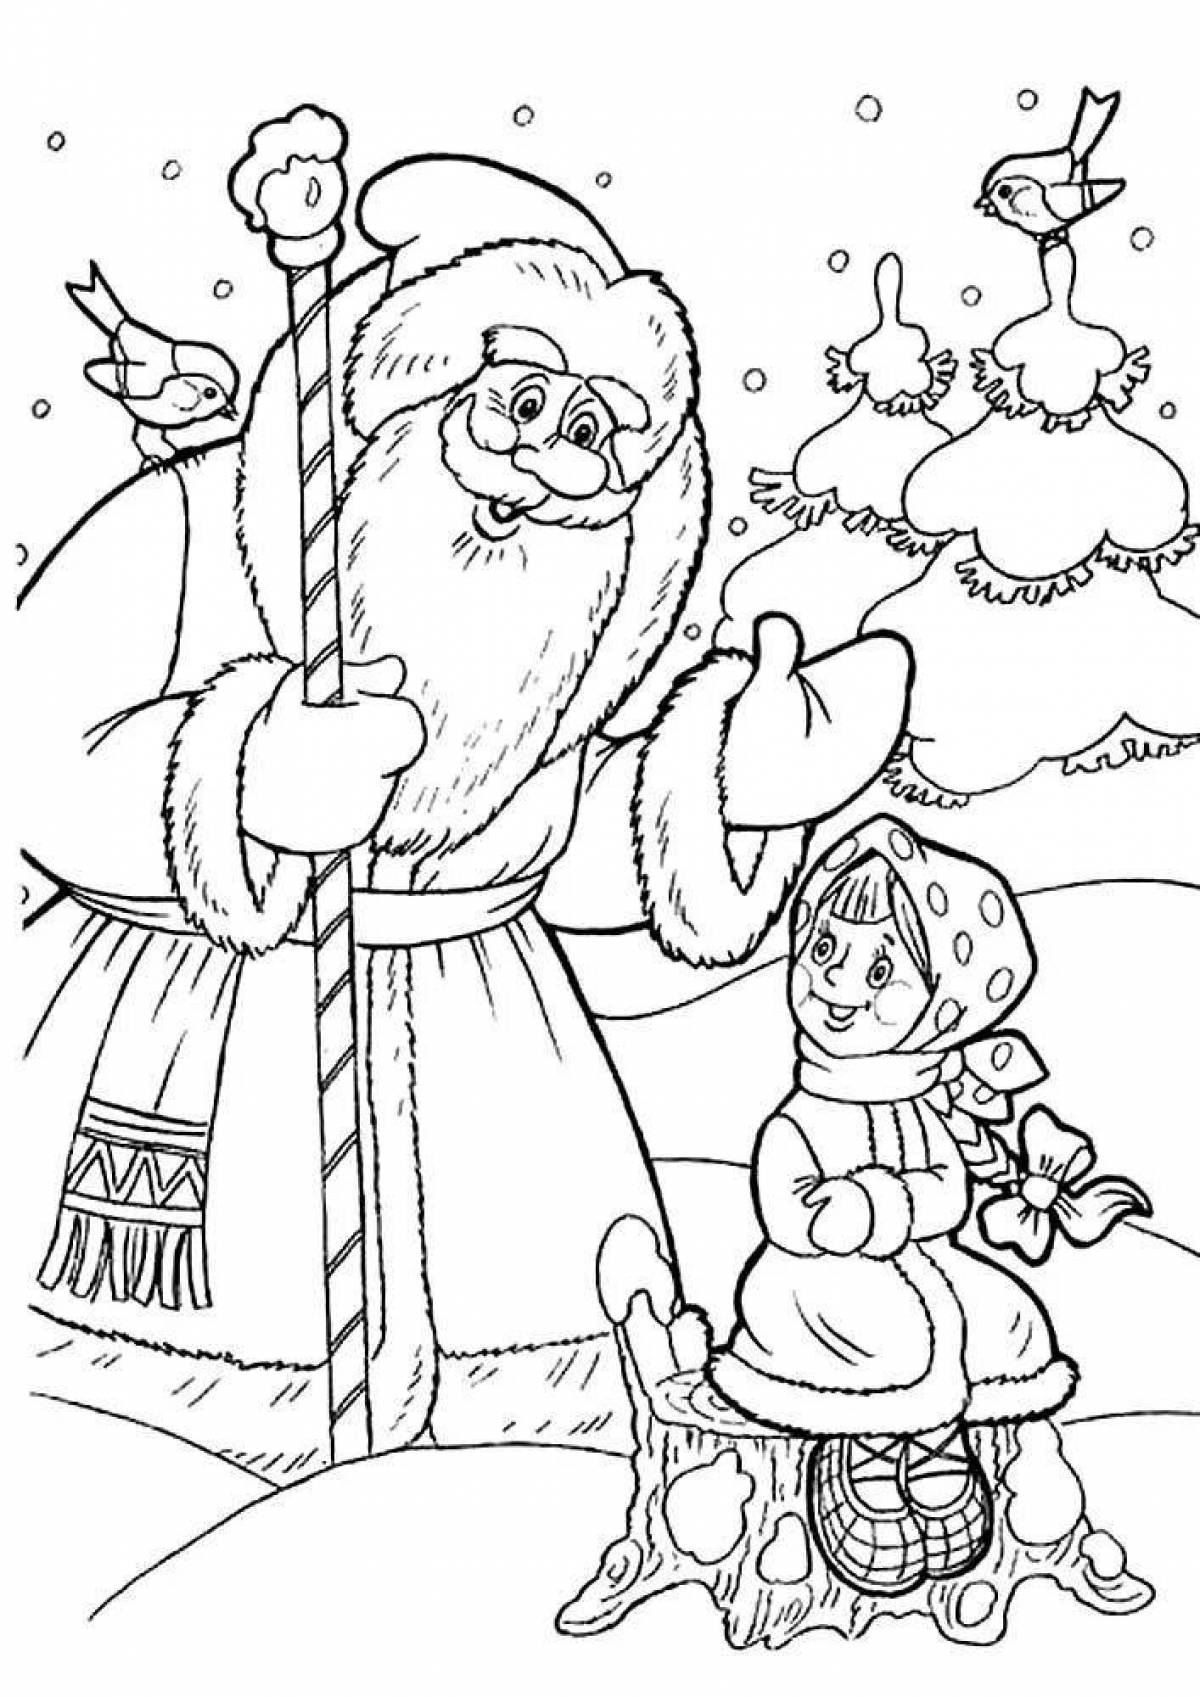 Incredible coloring book two frosts in a fairy tale